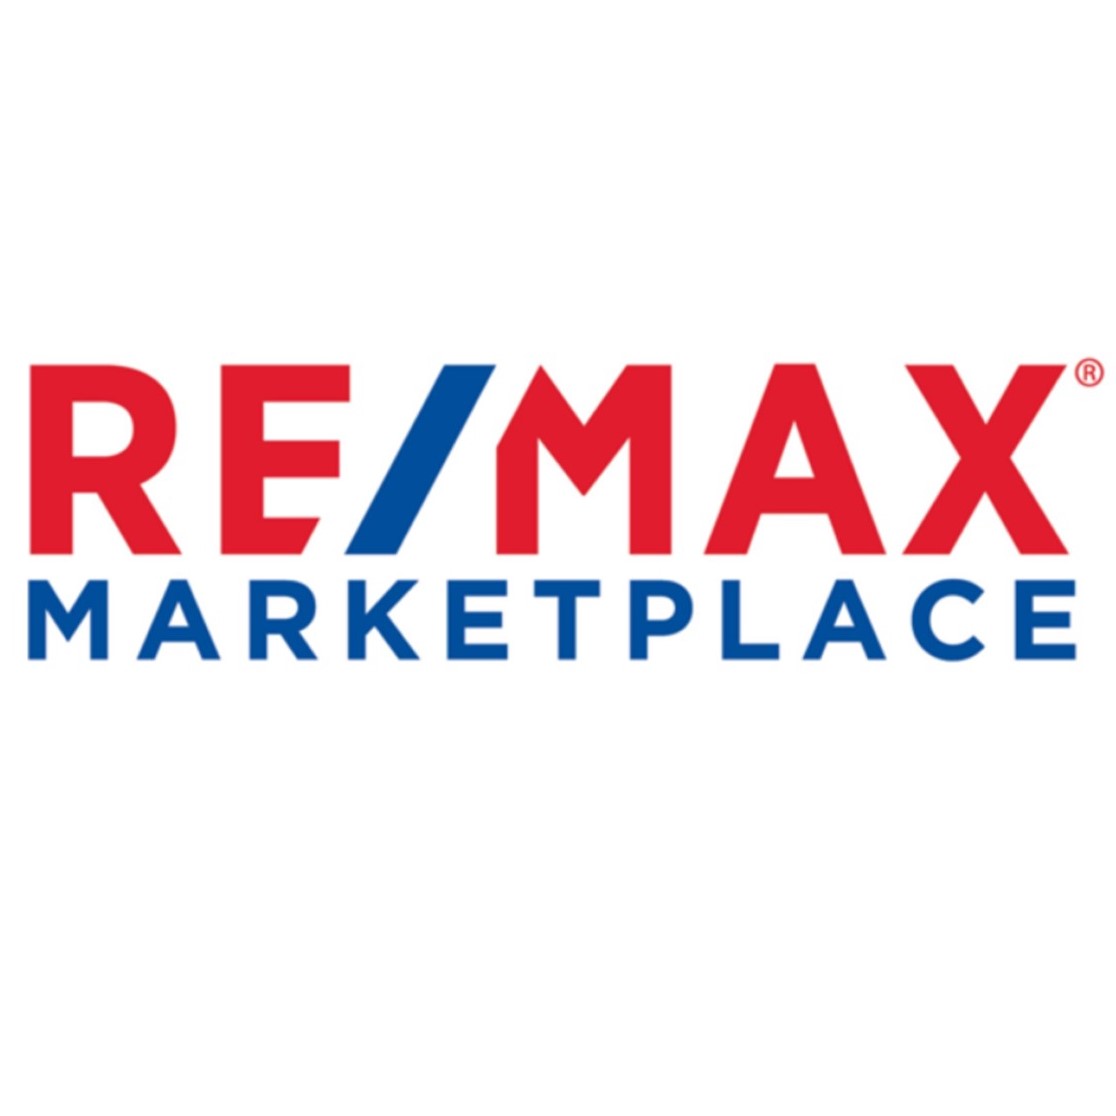 Re/Max Marketplace